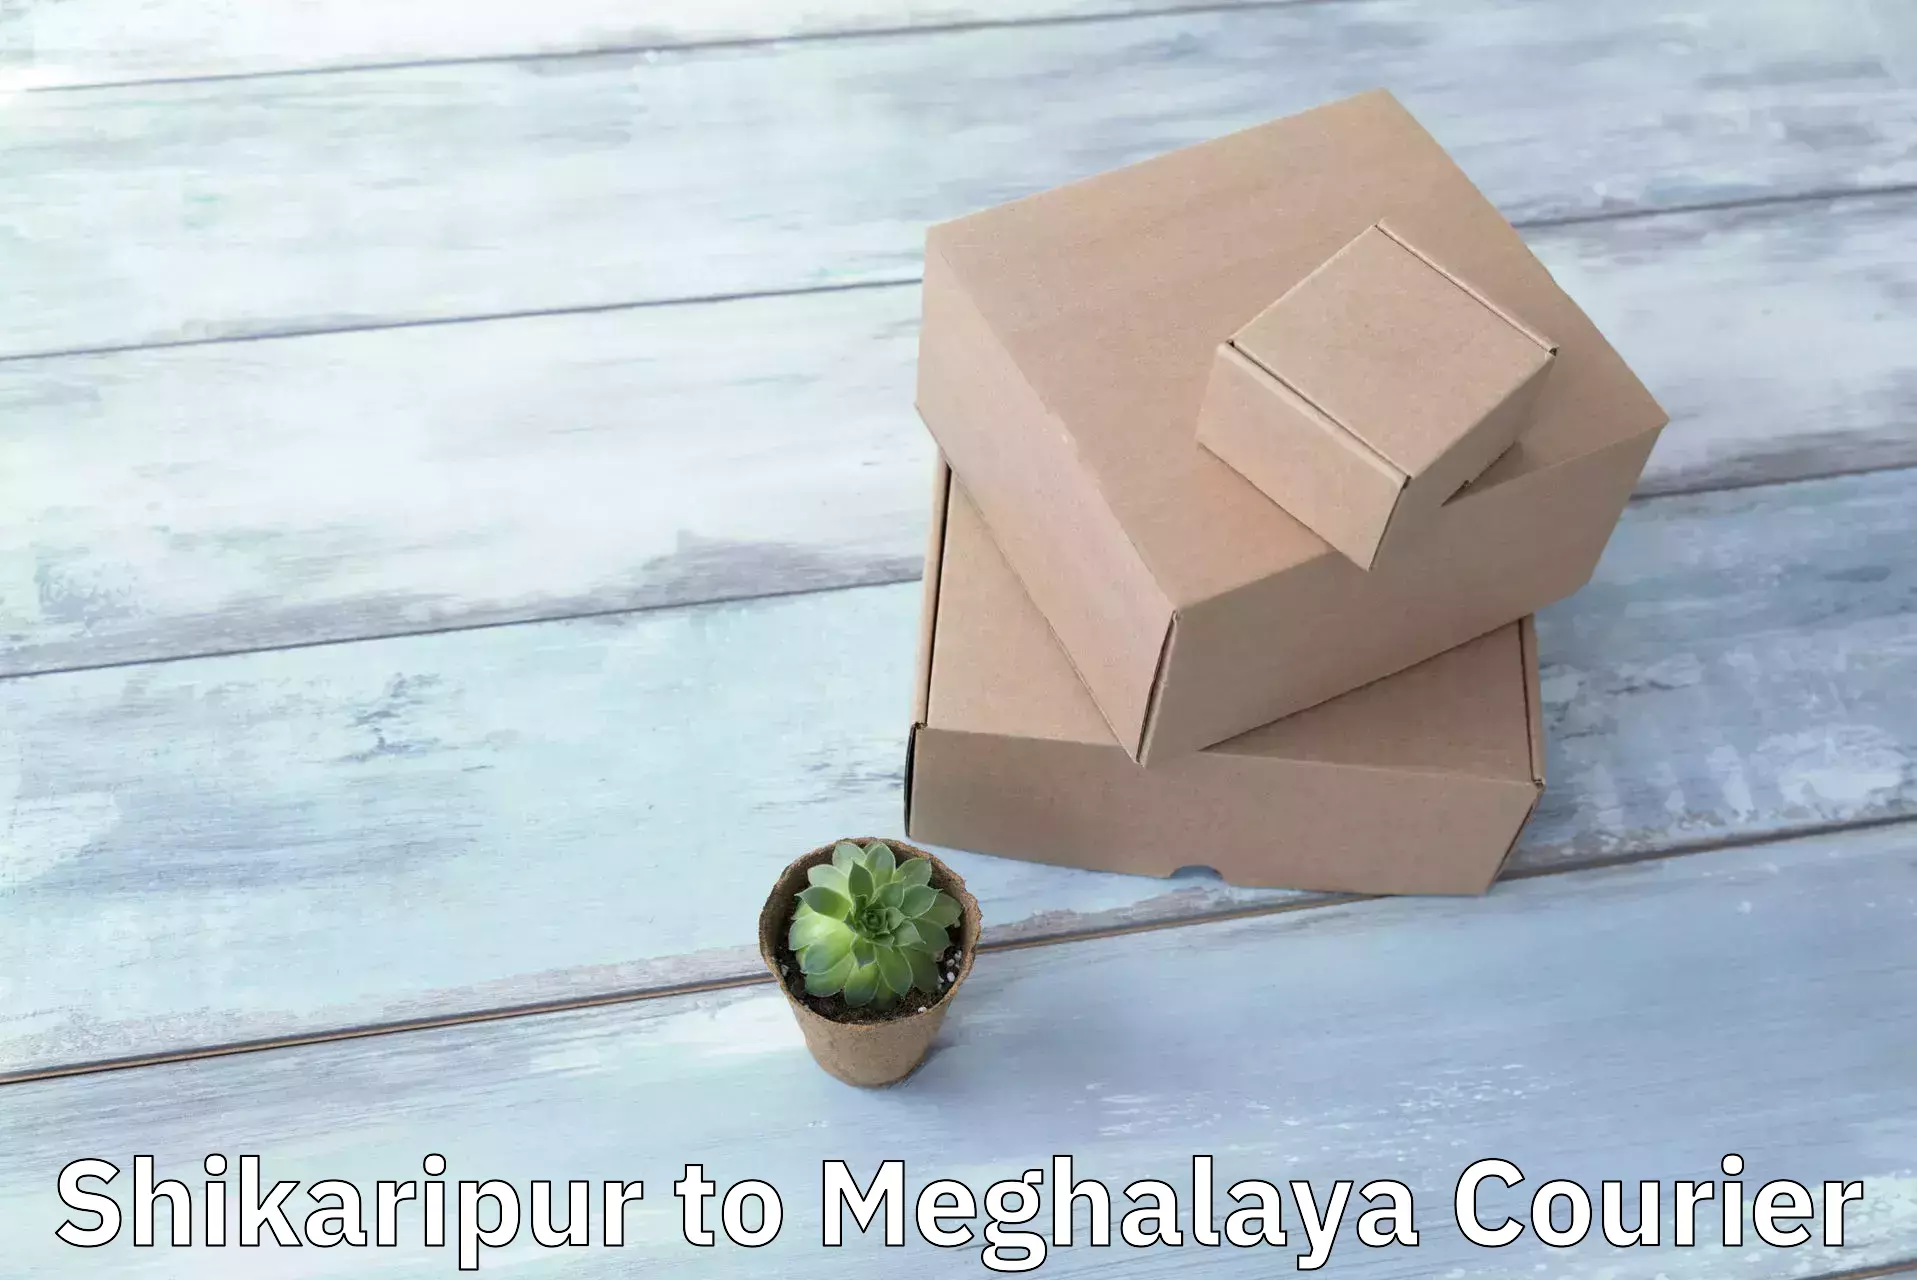 Overnight delivery services Shikaripur to Meghalaya